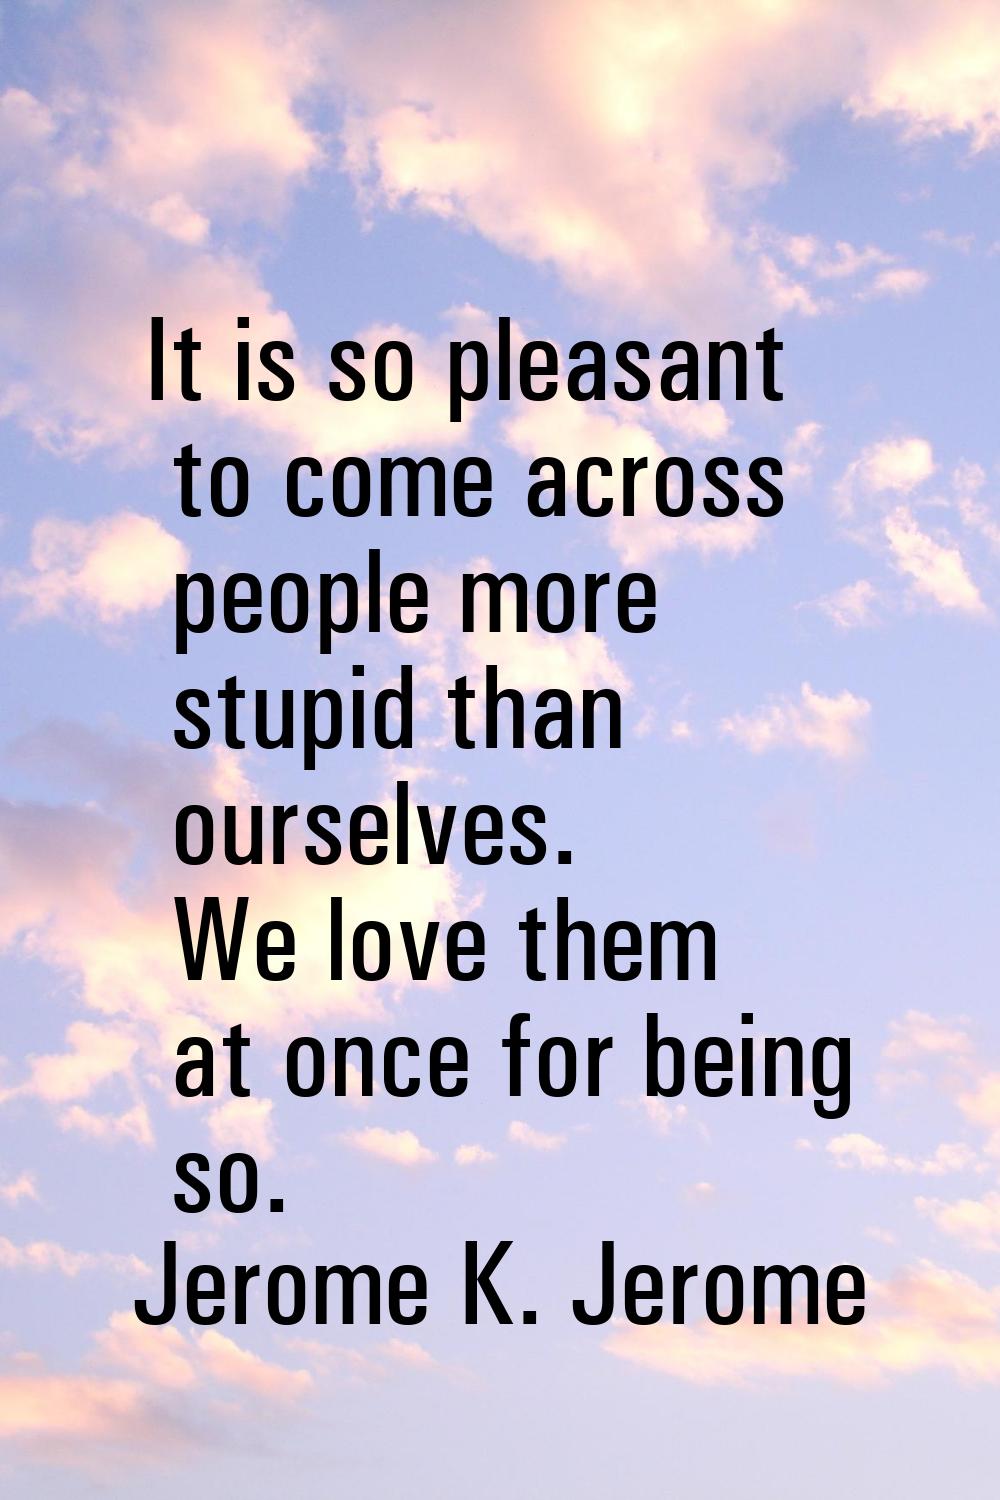 It is so pleasant to come across people more stupid than ourselves. We love them at once for being 